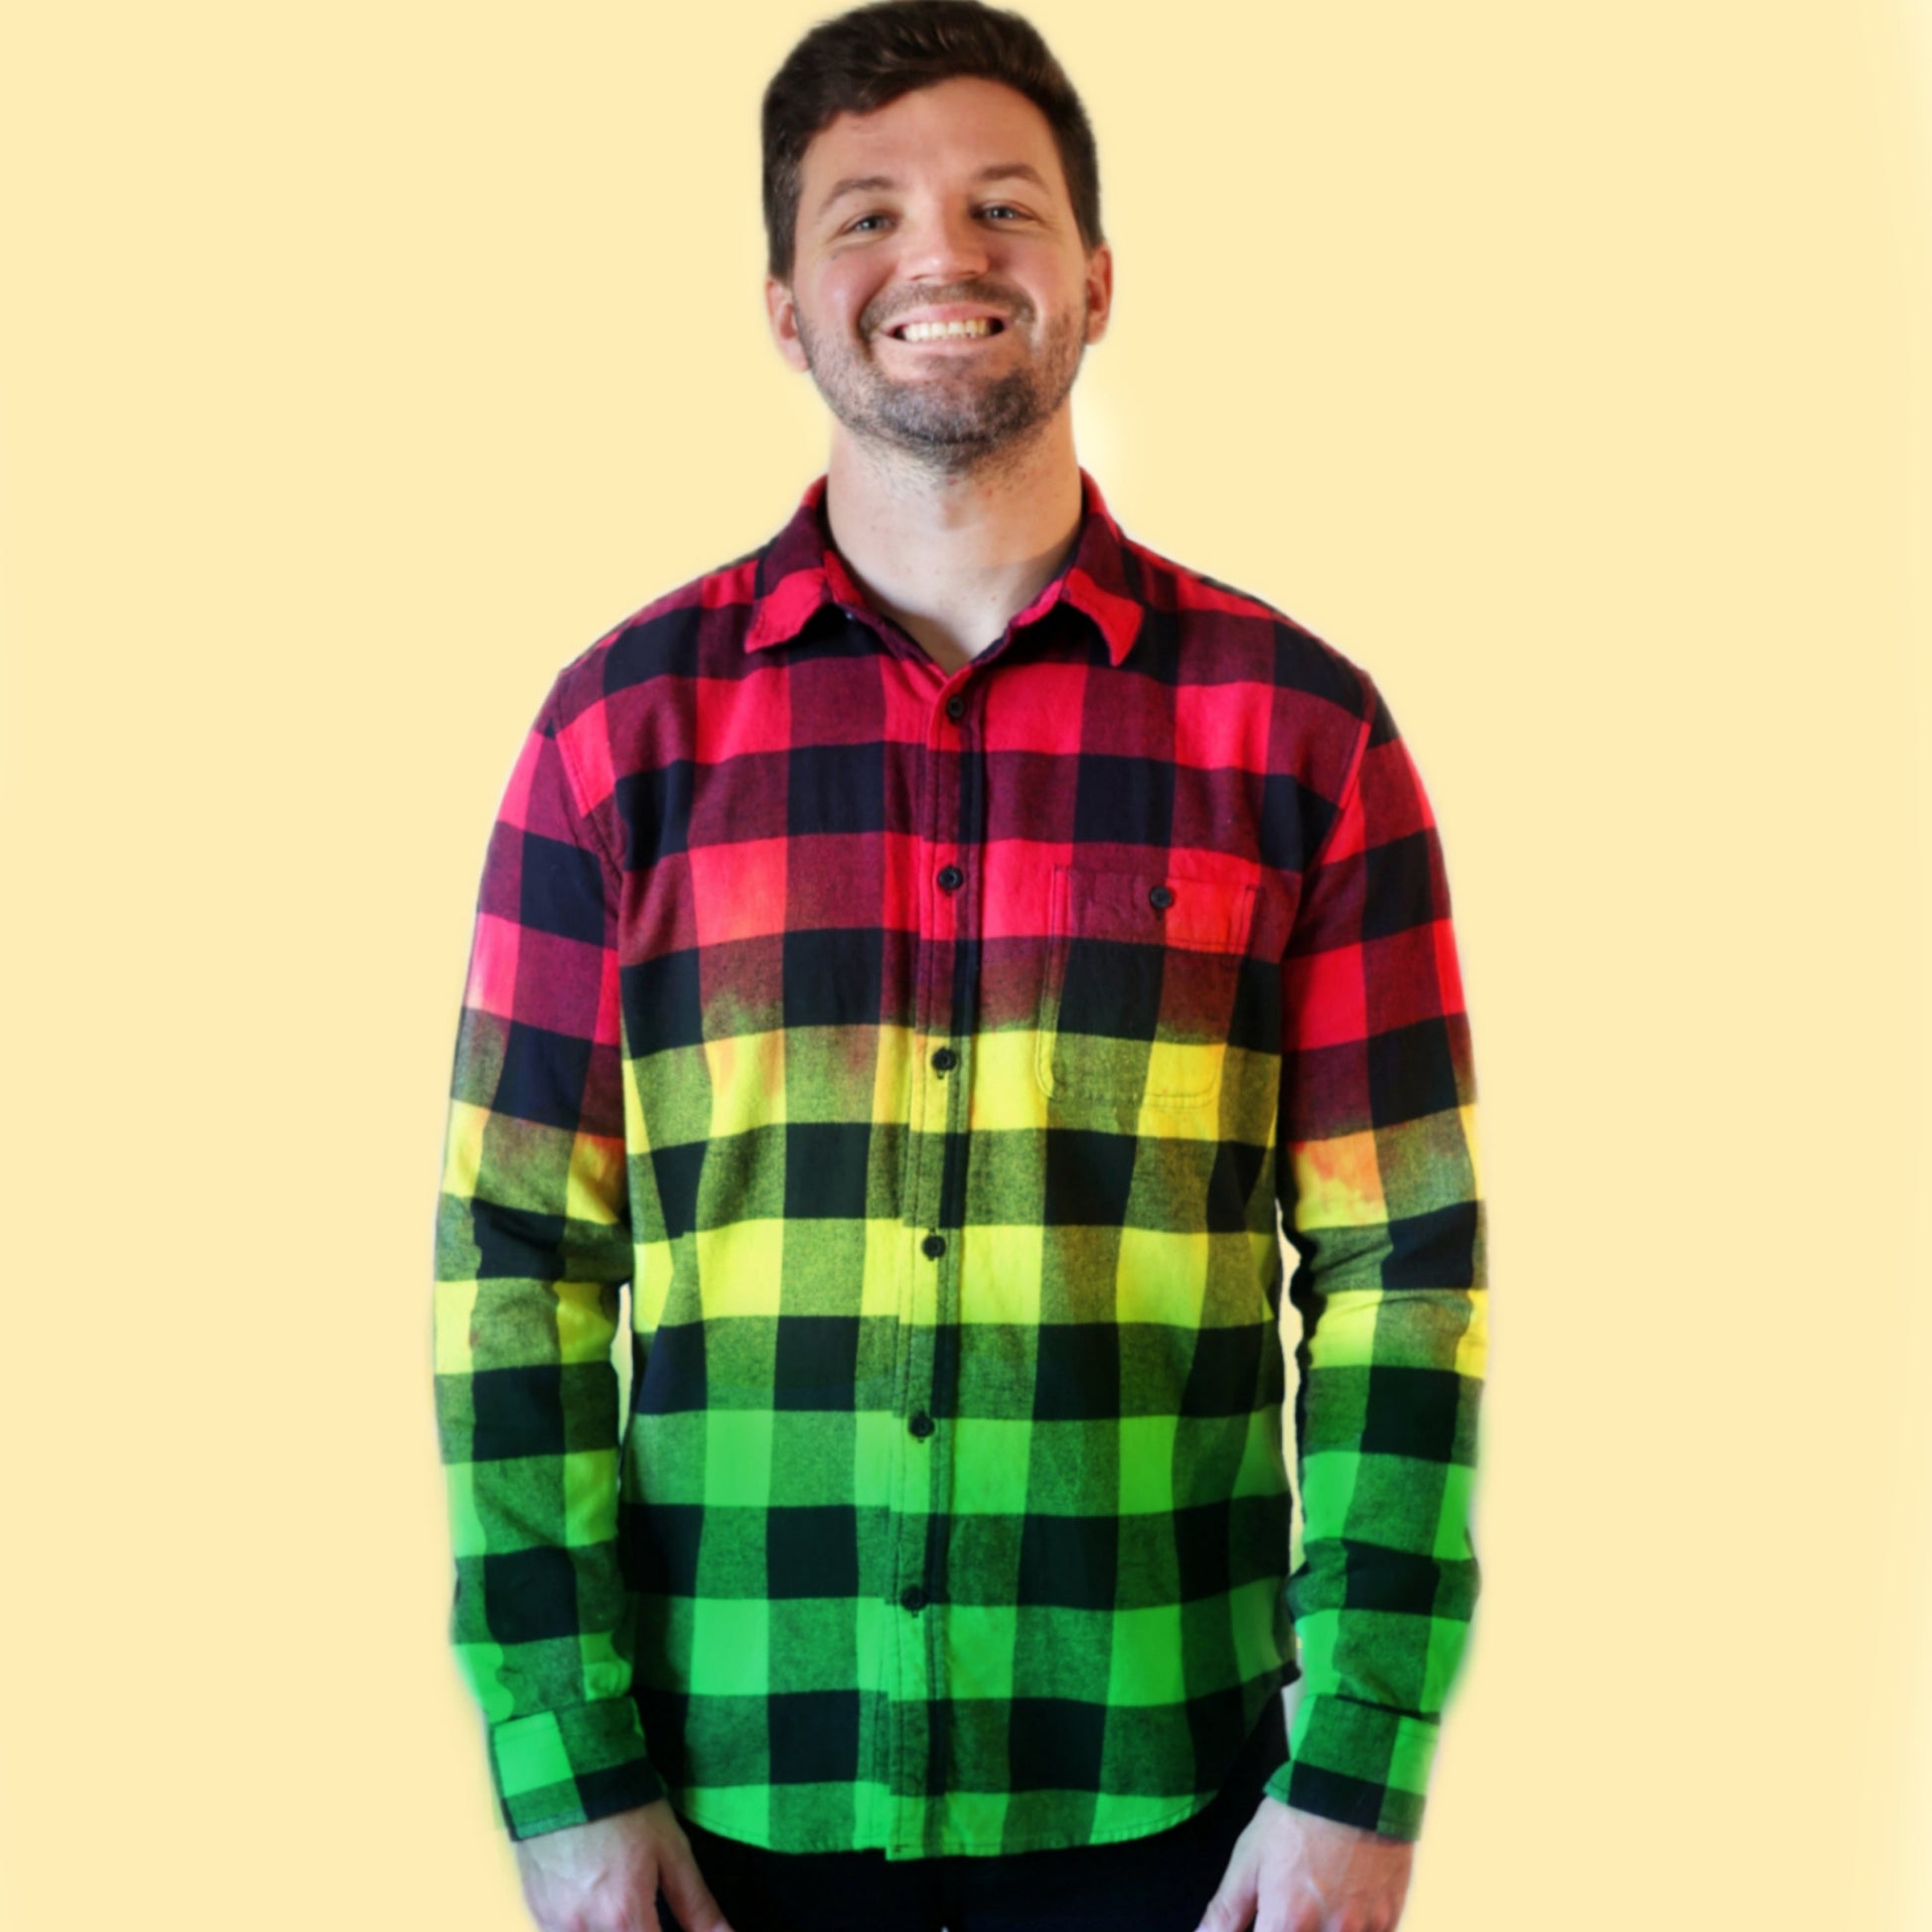 Rasta Tie Dye Plaid Flannel Shirt for men and women. Reggae Dip Dye Gradient Flannel is Bright and unique. Handmade with quality fiber reactive dyes for vibrant red yellow green colors that lasts.100% Cotton Soft Flannel Fabric, Collar Neckline,  Button Closure, Long Sleeves, front pocket, Machine washable